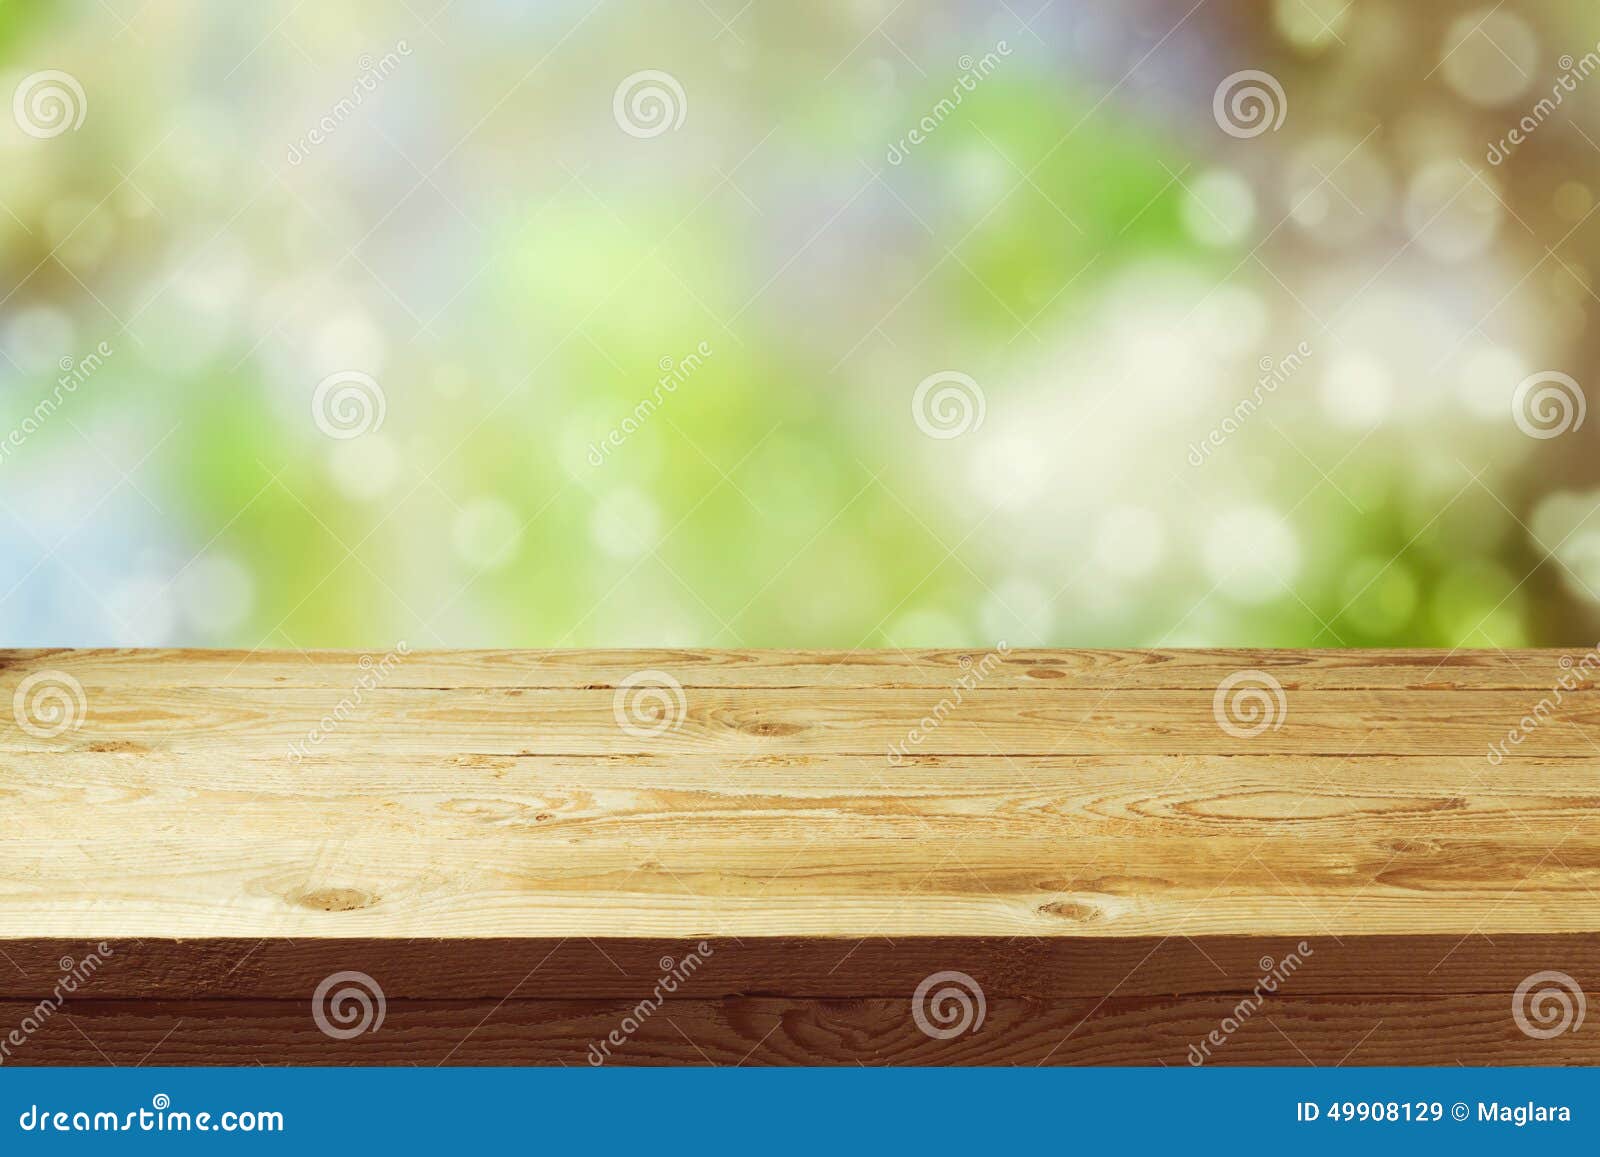 old wooden deck table with spring bokeh background. ready for product display montage.